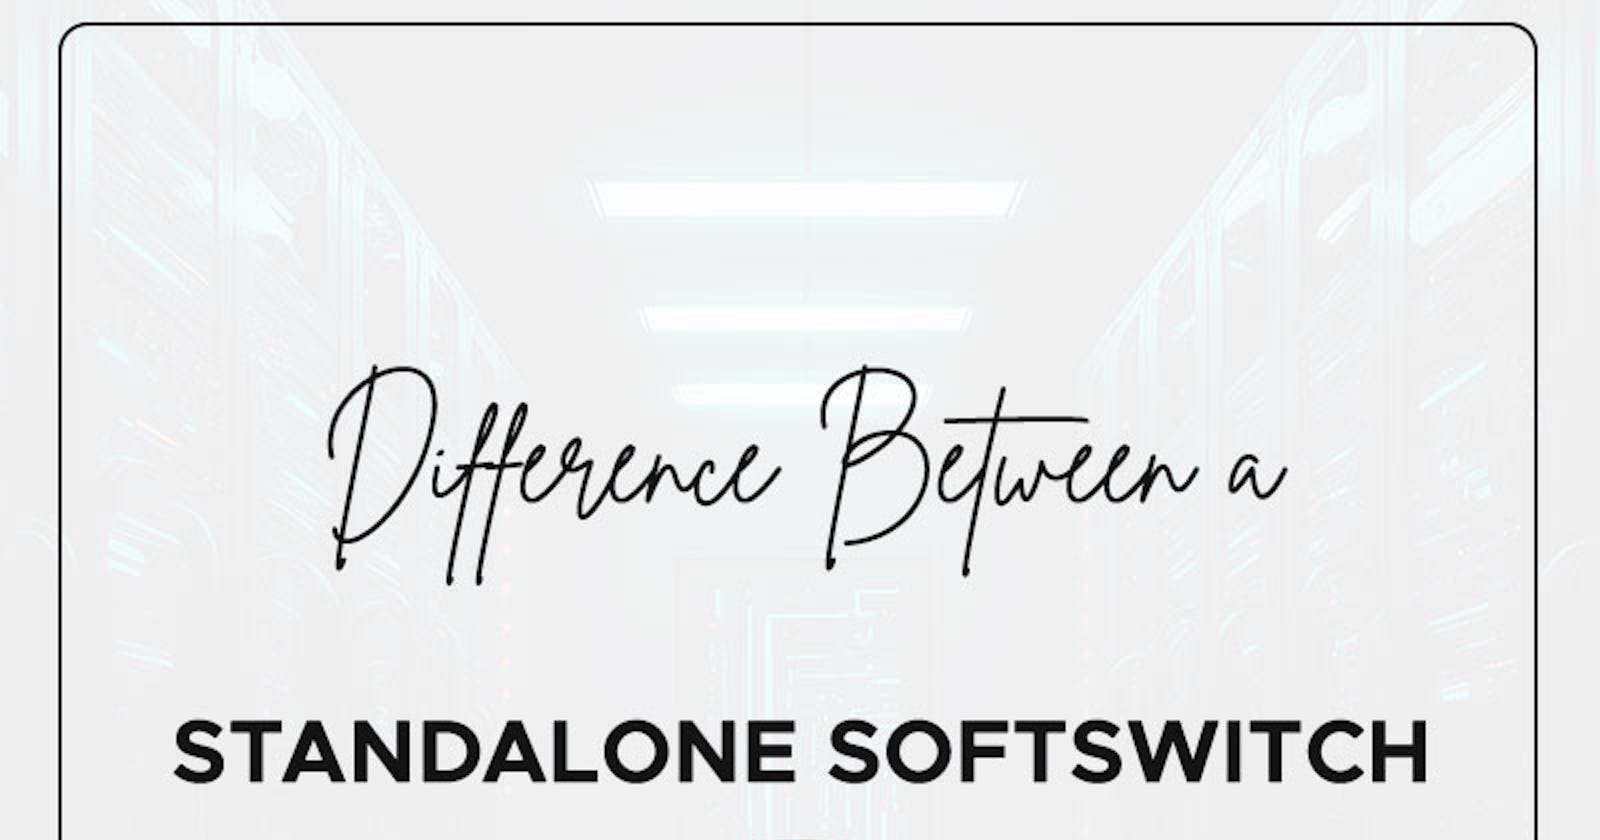 Difference Between A Standalone SoftSwitch And A Distributed Softswitch Architecture